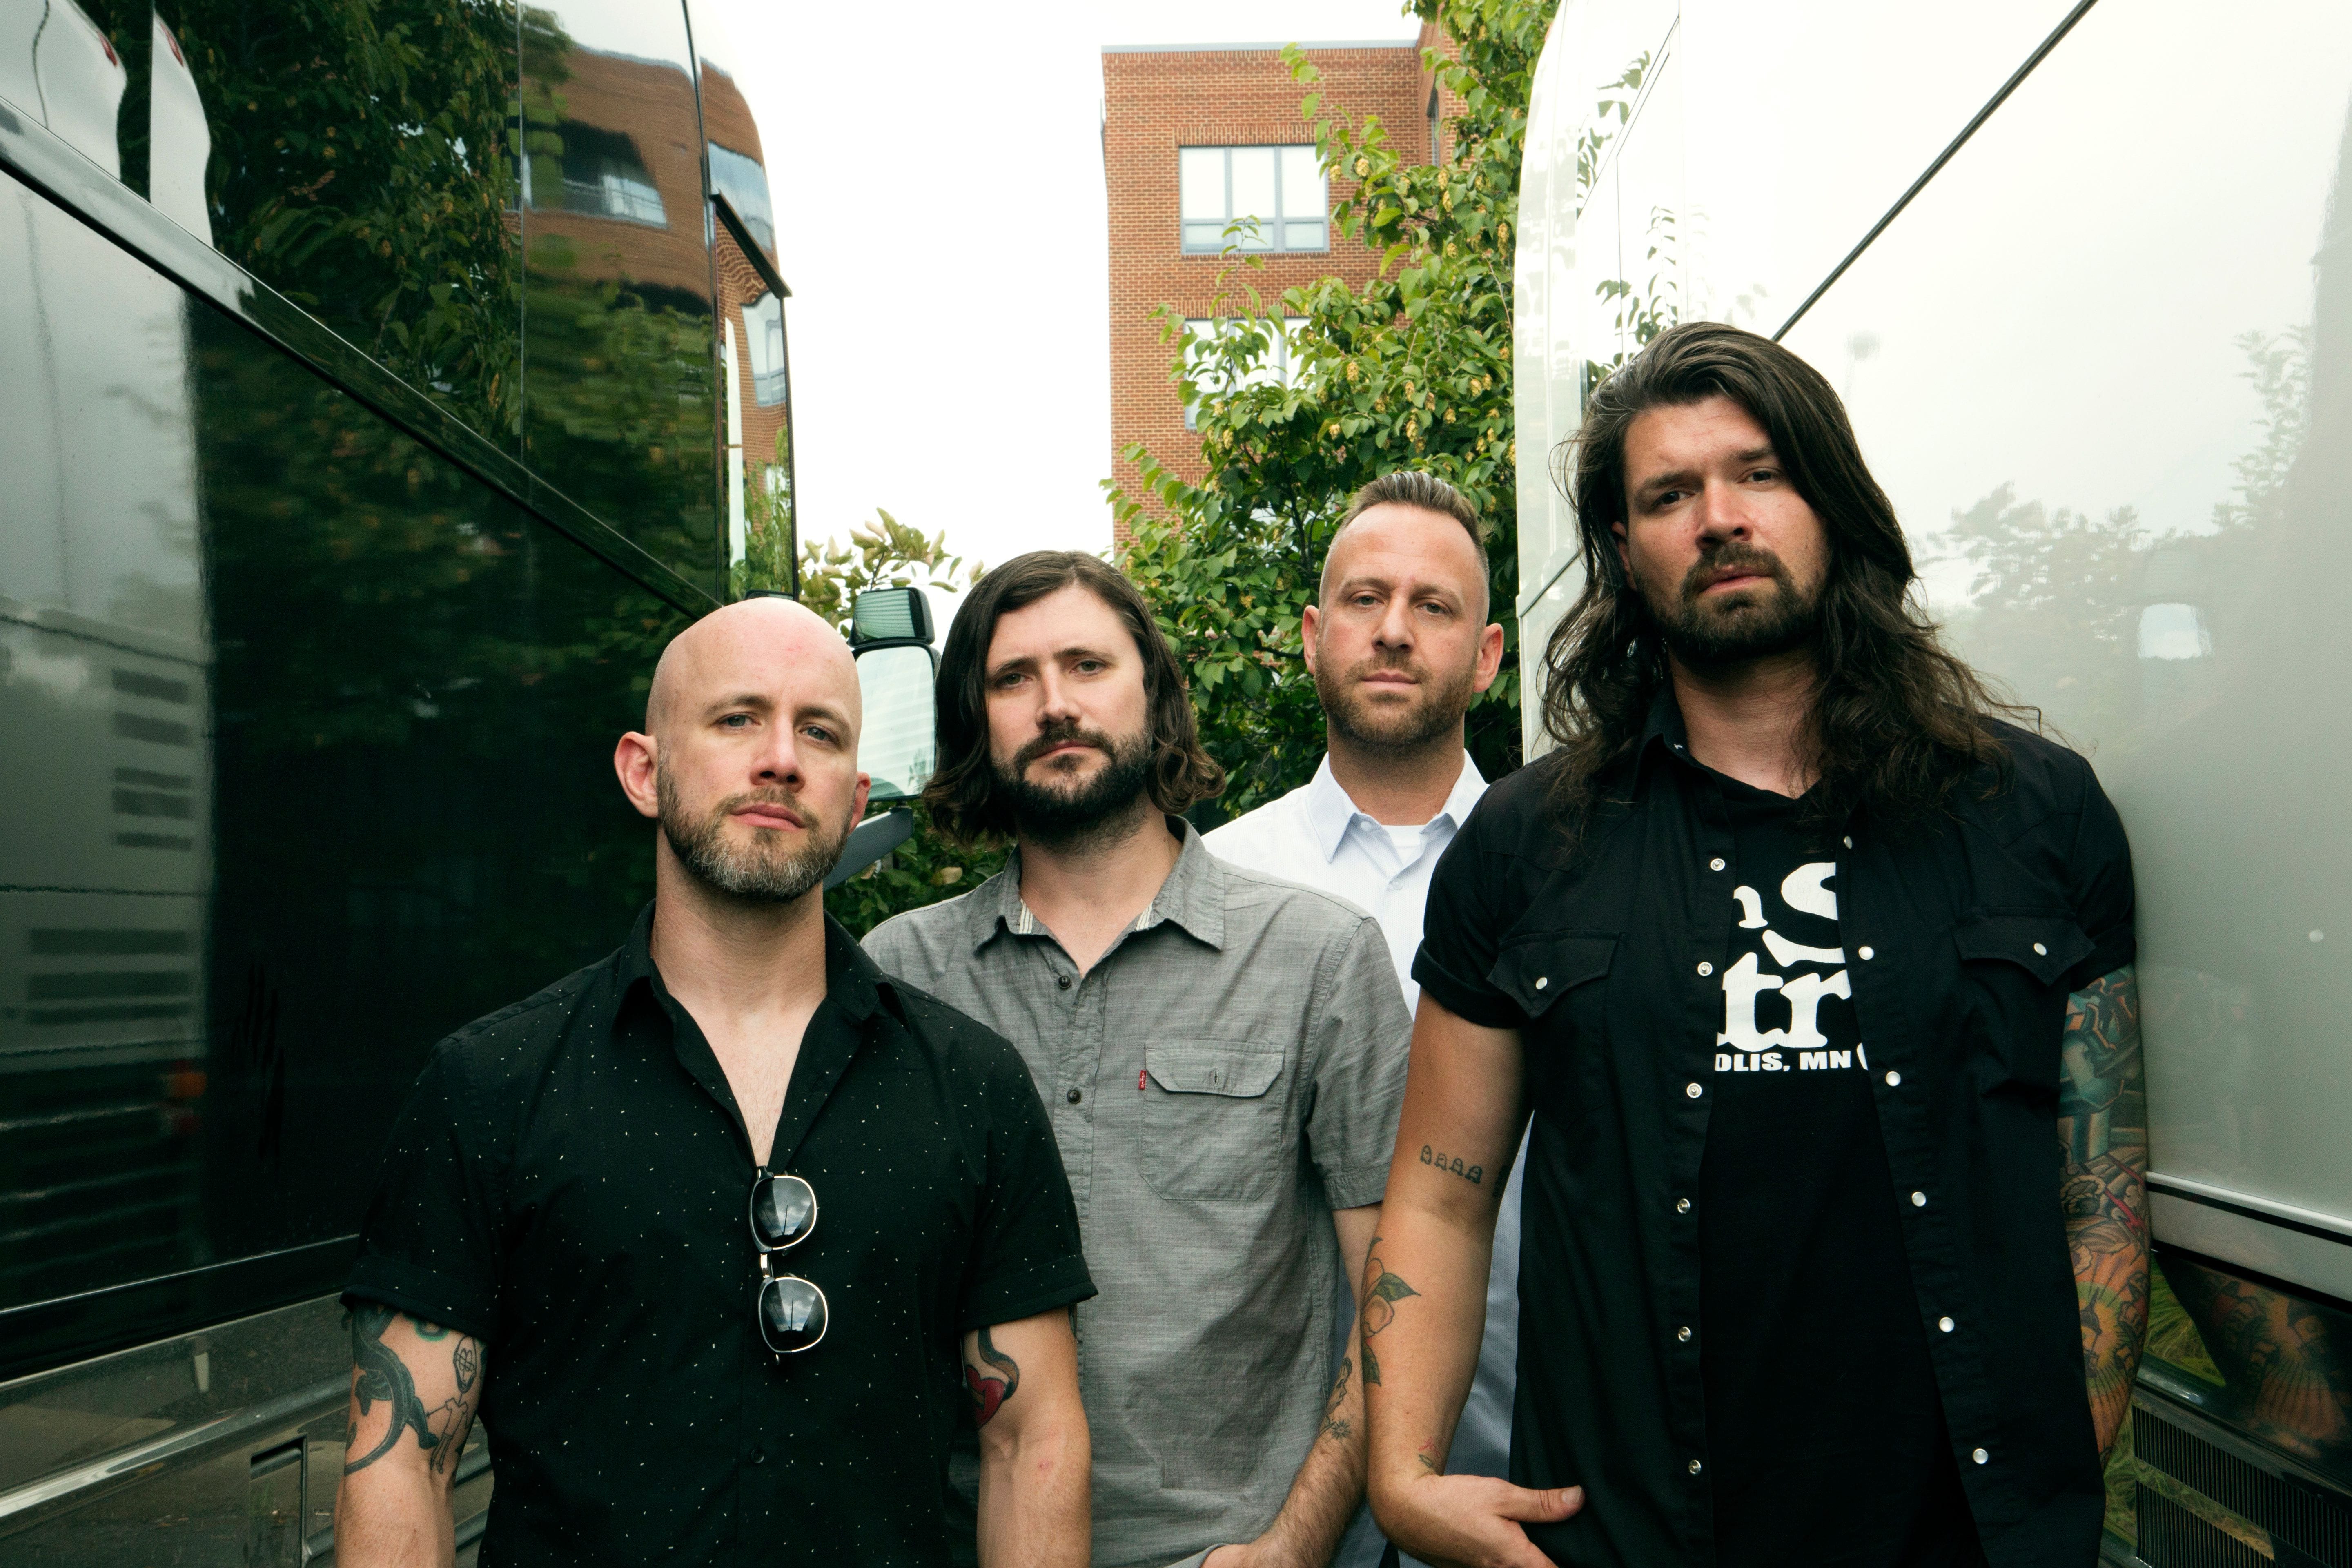 Taking Back Sunday Revisit Their 2011 Self-Titled Release in New Album-By-Album Video (premiere)